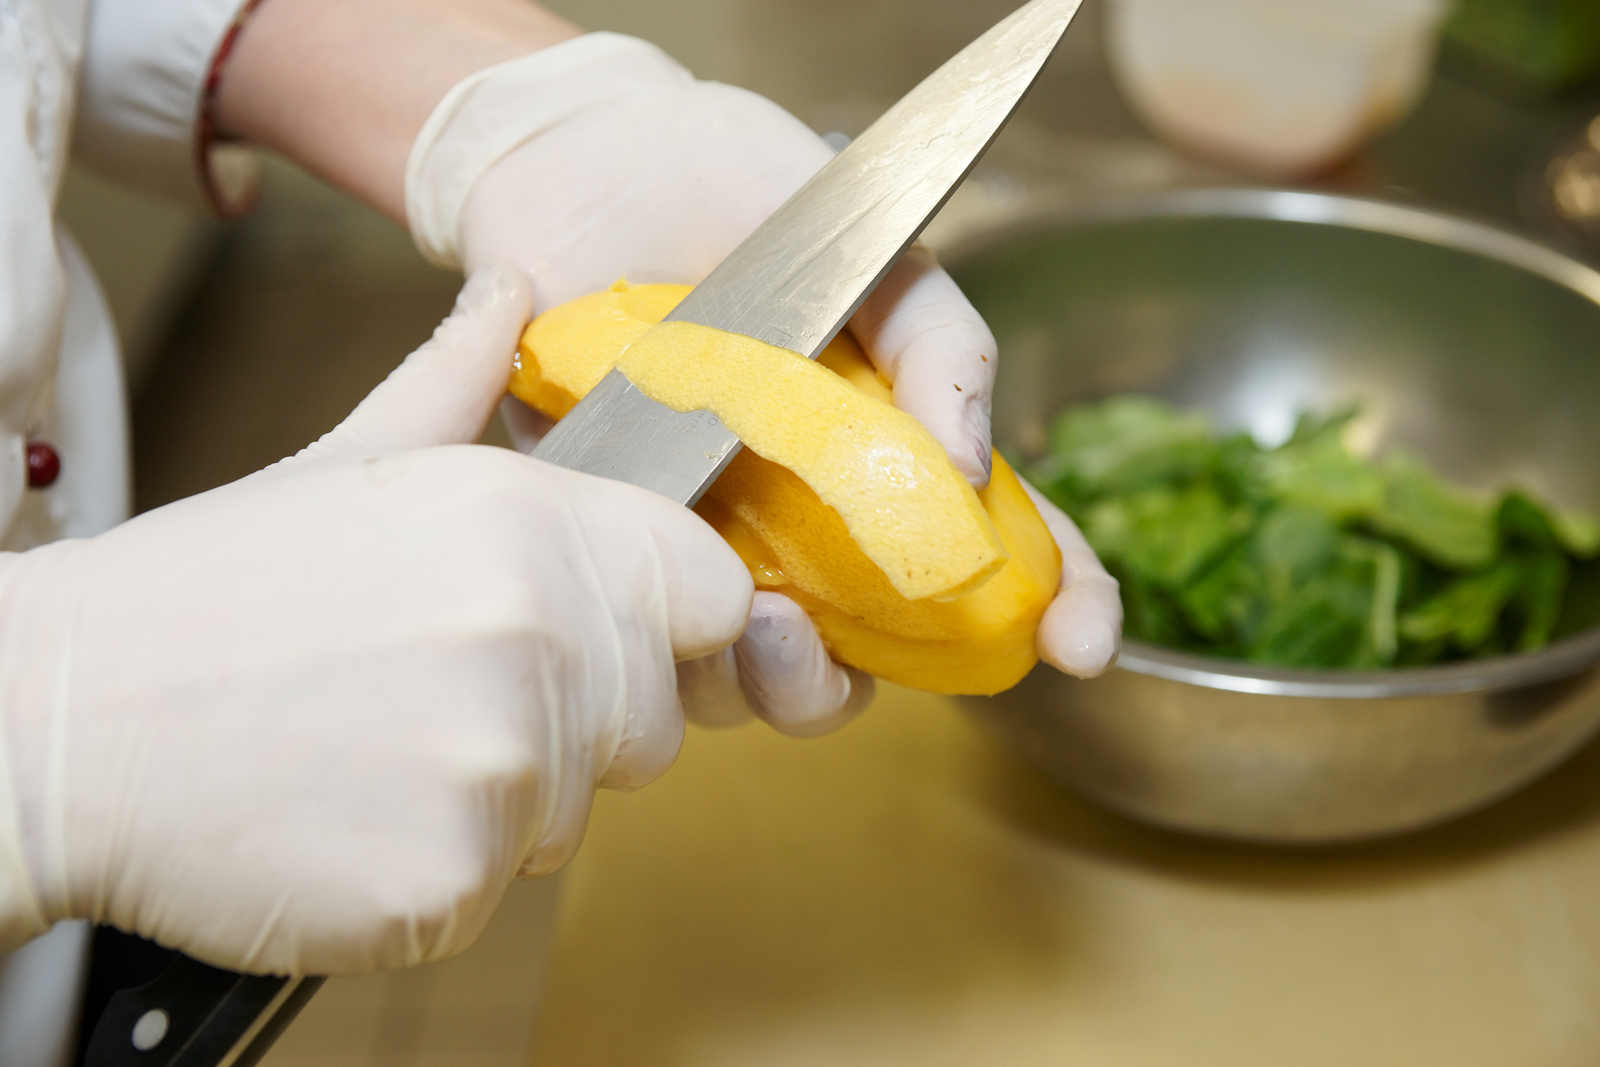 Stock photo of a chef peeling a vegetable